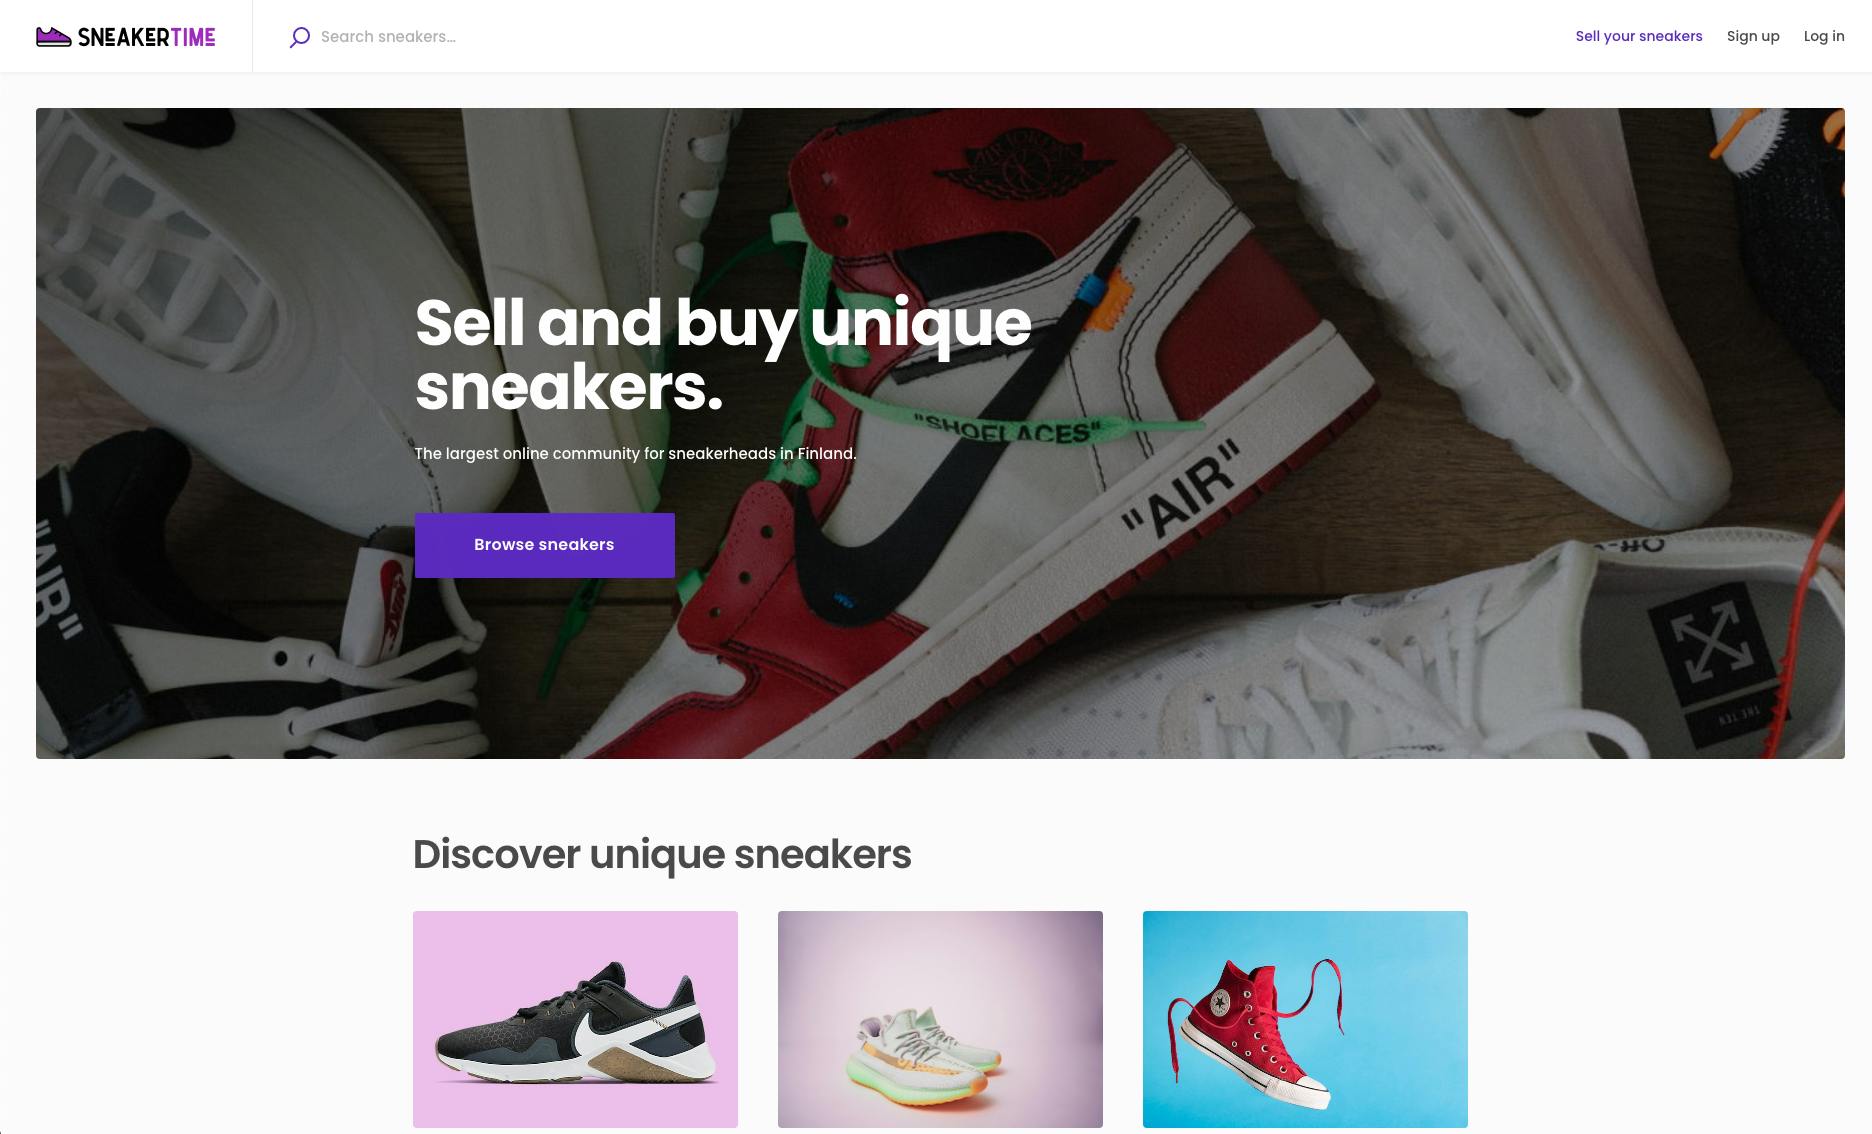 Screenshot of an example Sharetribe marketplace called Sneakertime, a marketplace for selling sneakers. The landing page has a hero image with multiple sneakers and a call-to-action button.